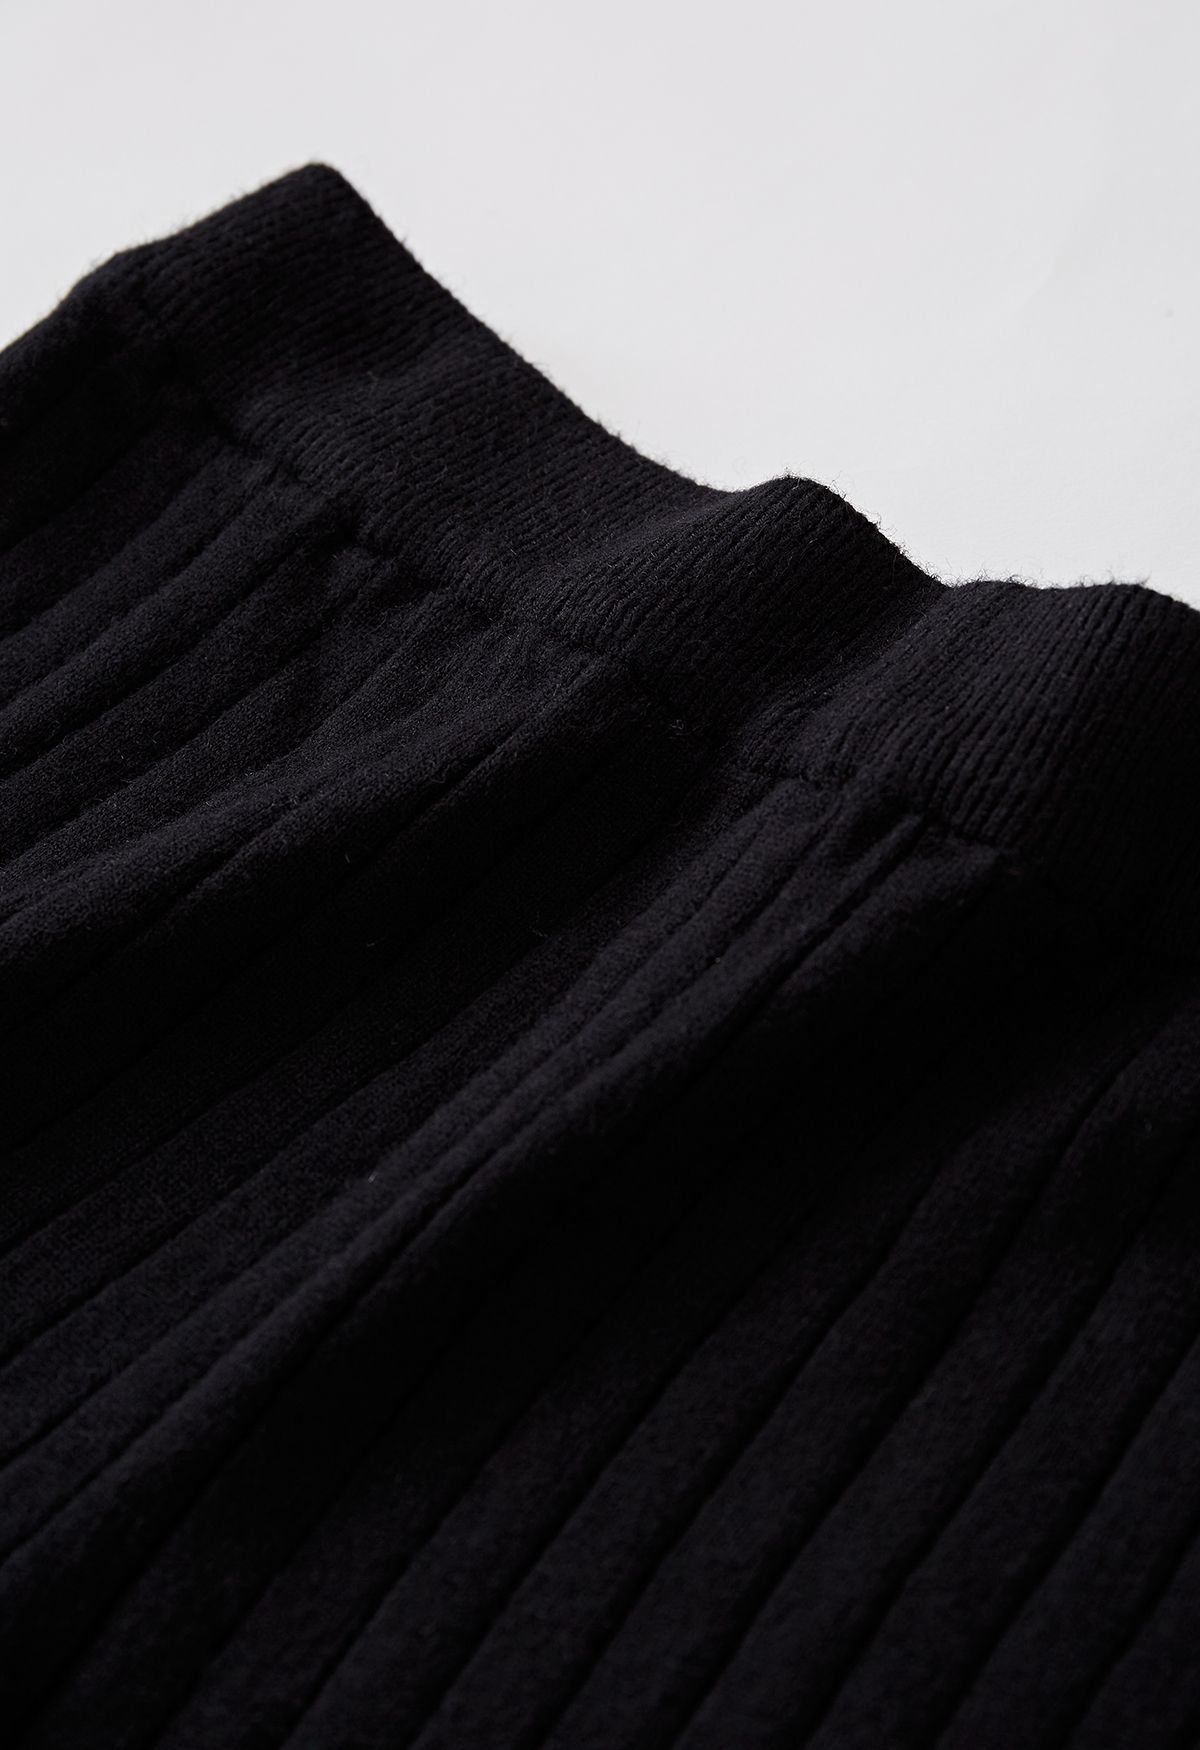 Ribbed Straight Leg Knit Pants in Black